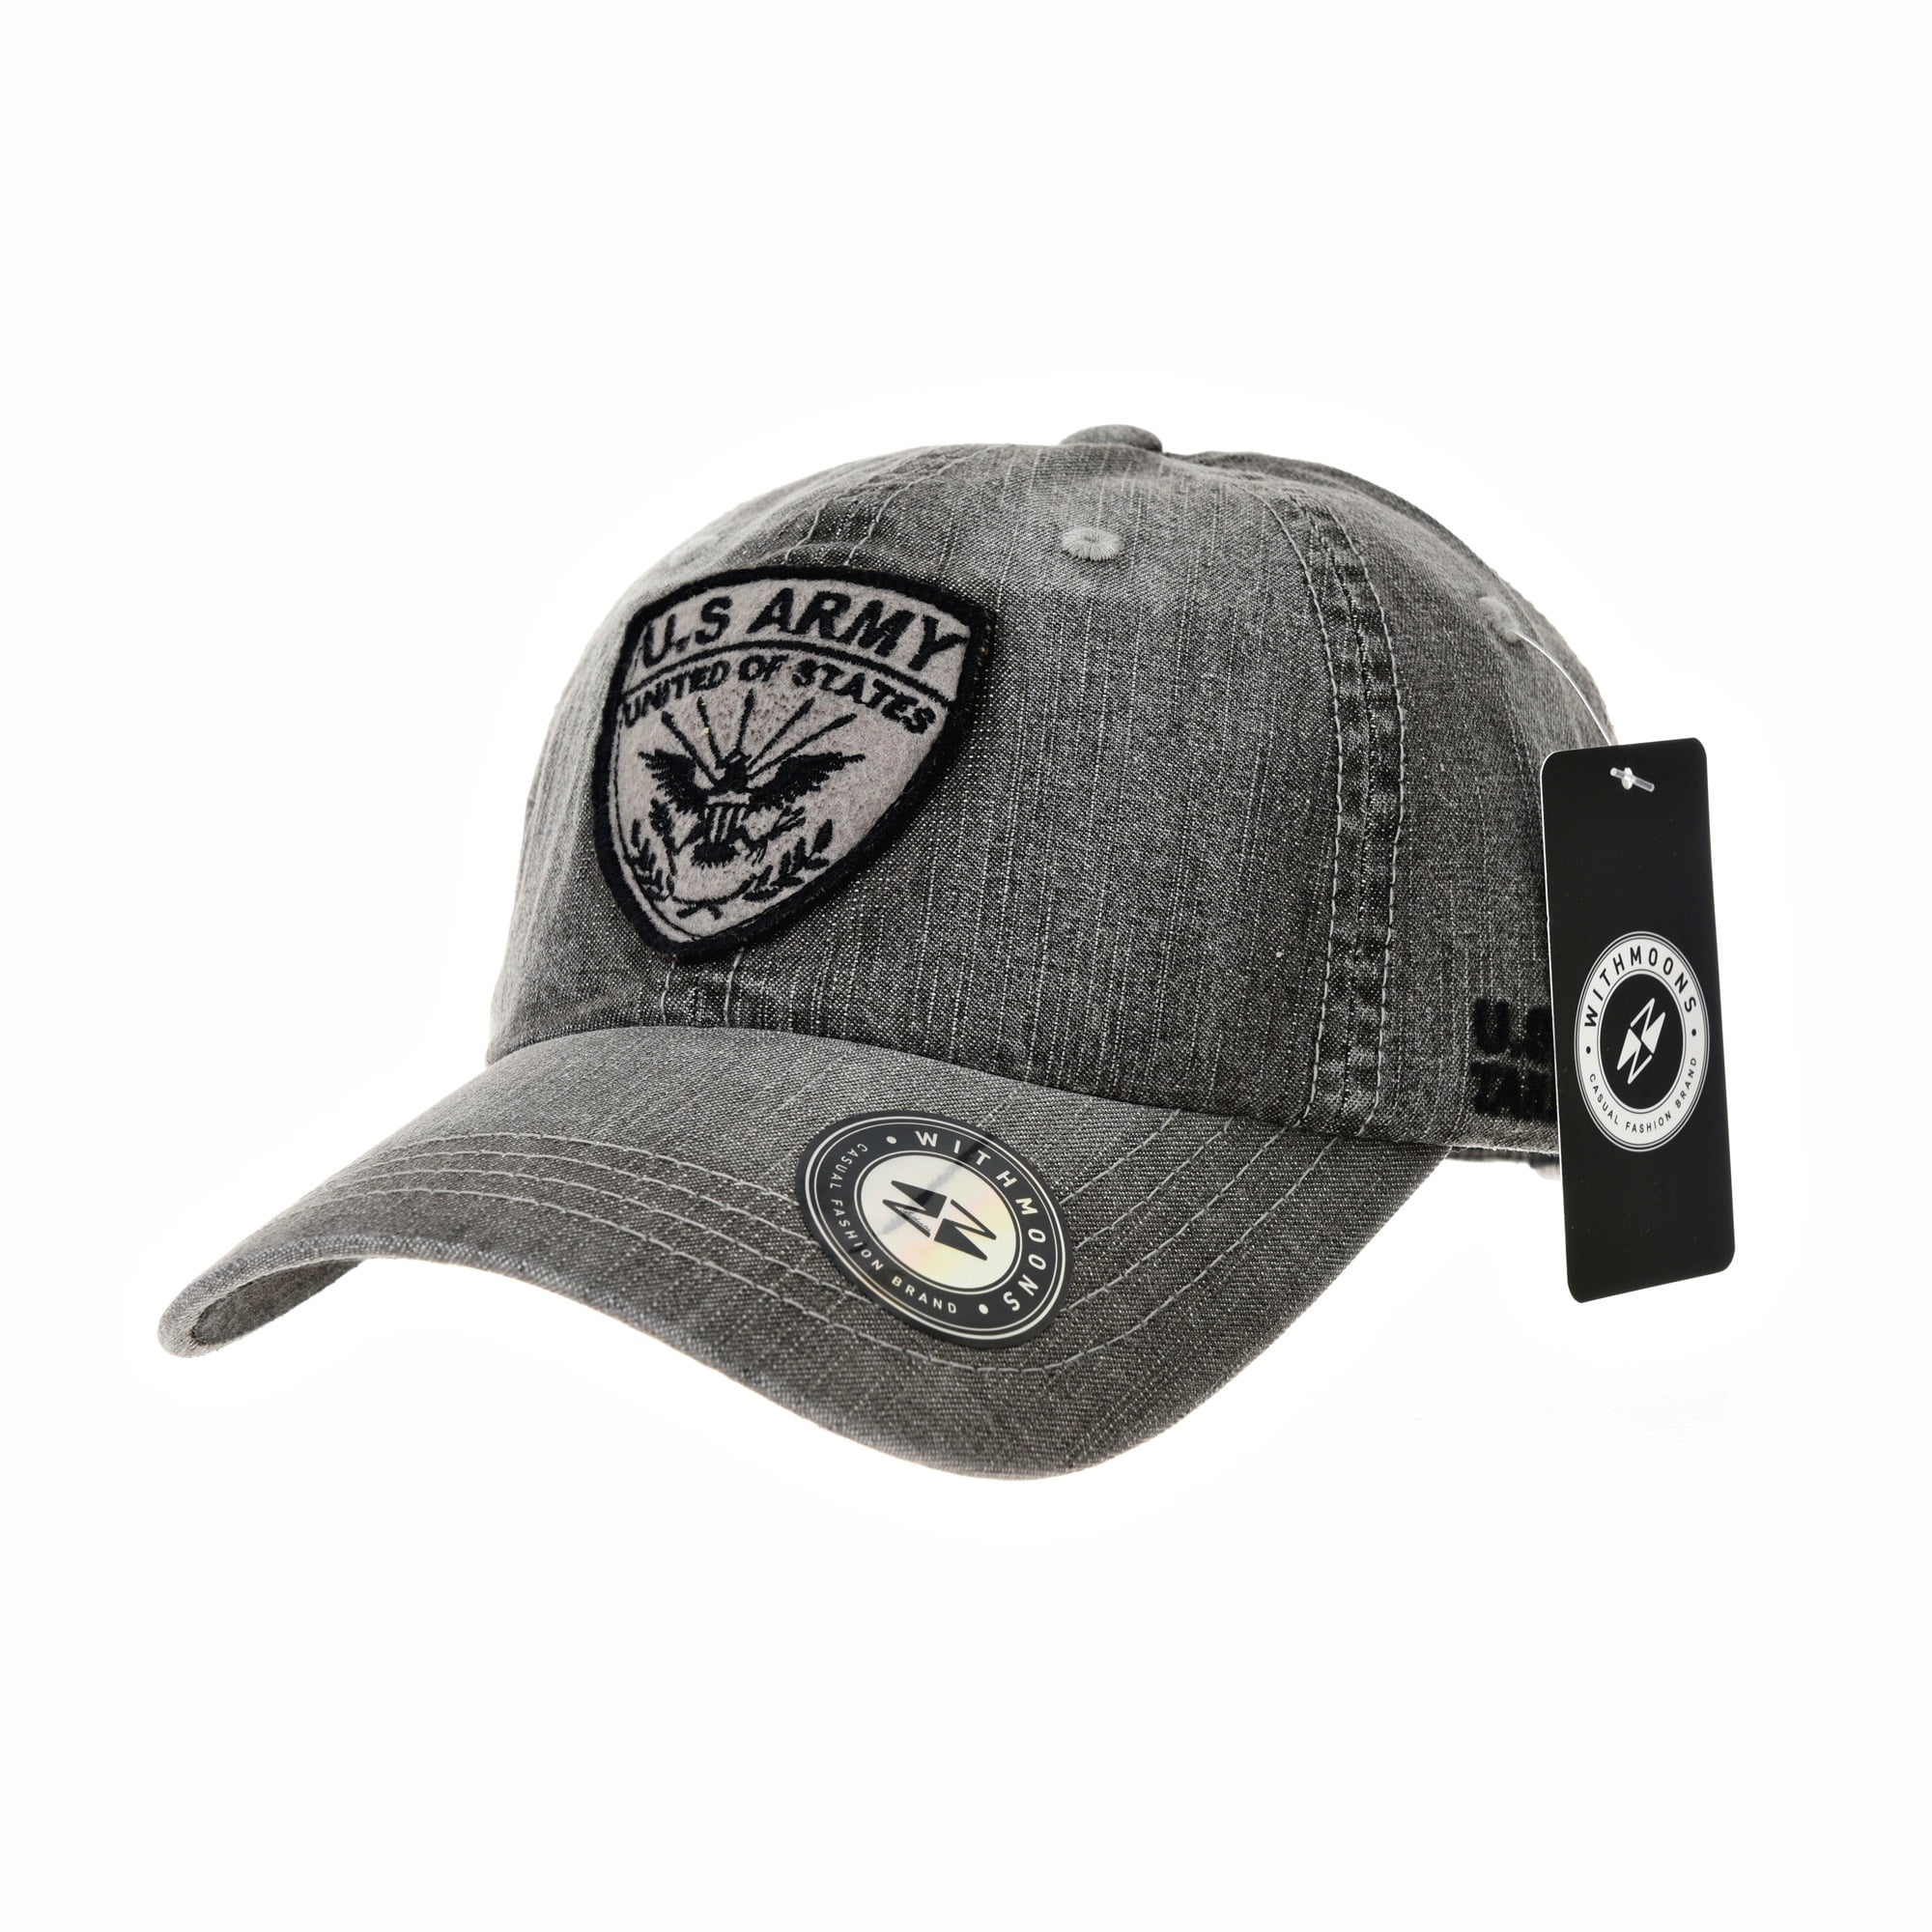 Withmoons Withmoons Denim Baseball Cap Us Army Patch Simple Plain